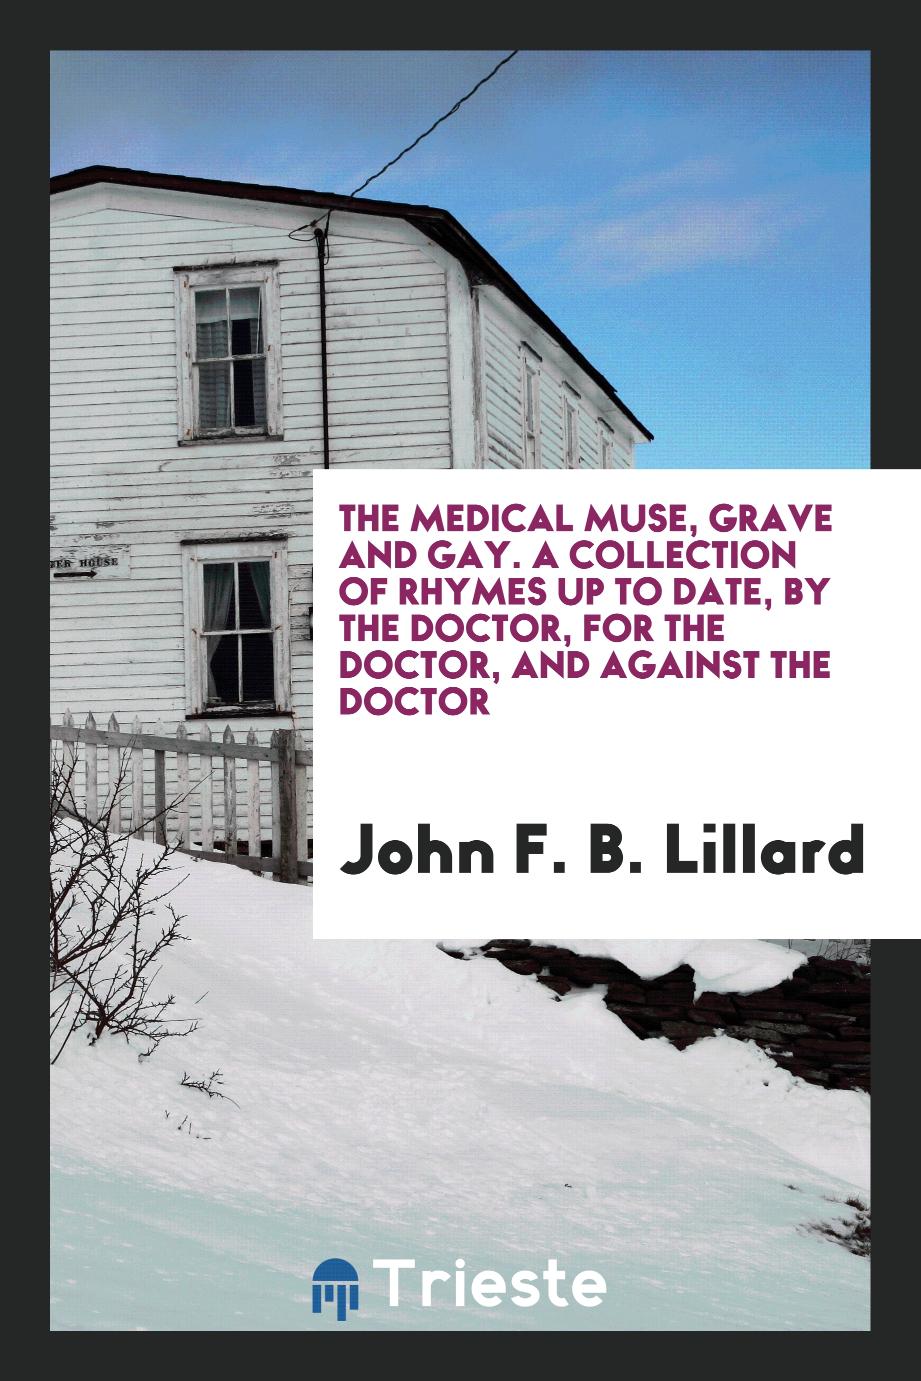 The Medical Muse, Grave and Gay. A Collection of Rhymes up to Date, by the Doctor, for the Doctor, and against the Doctor